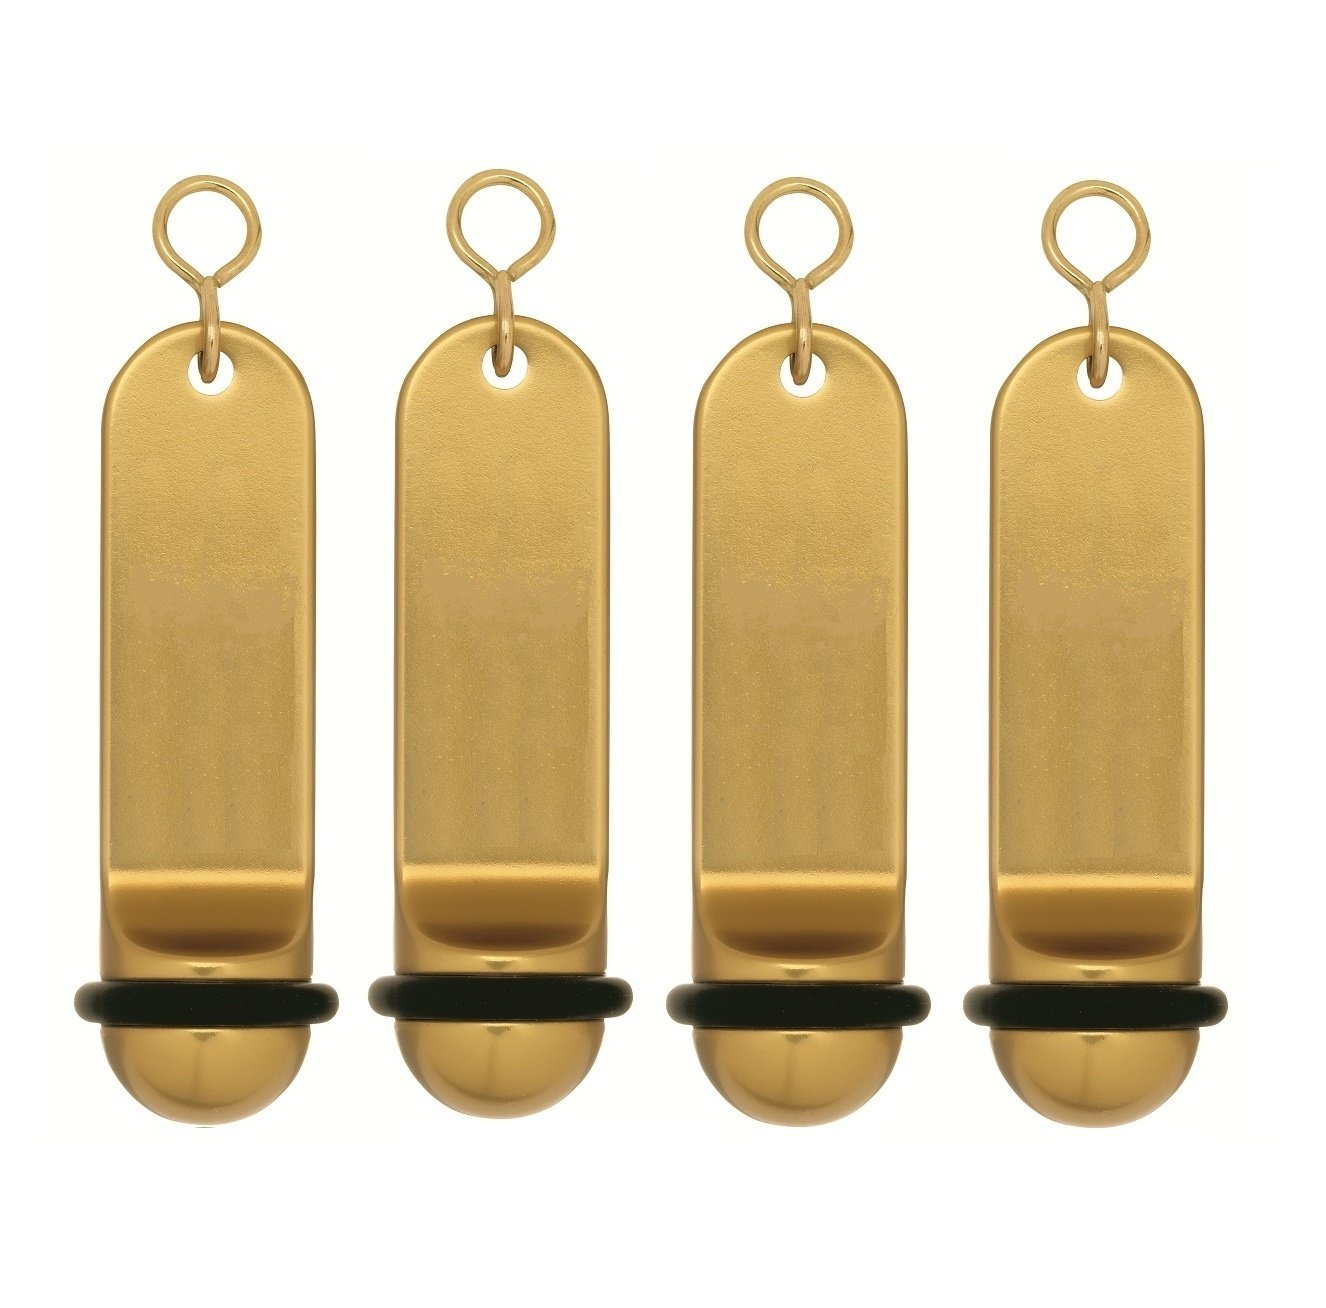 Big Classic Hotel Key Chain with text